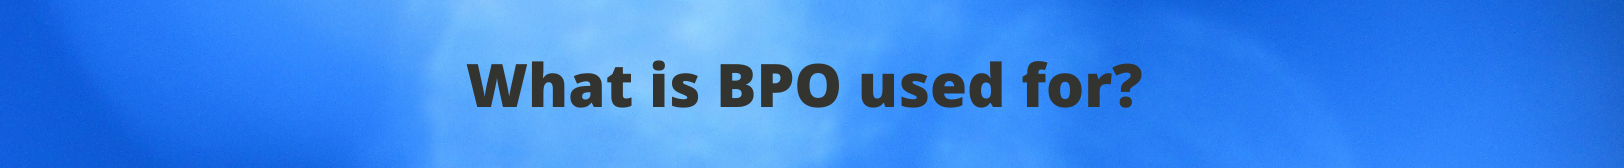 what-is-bpo-used-for